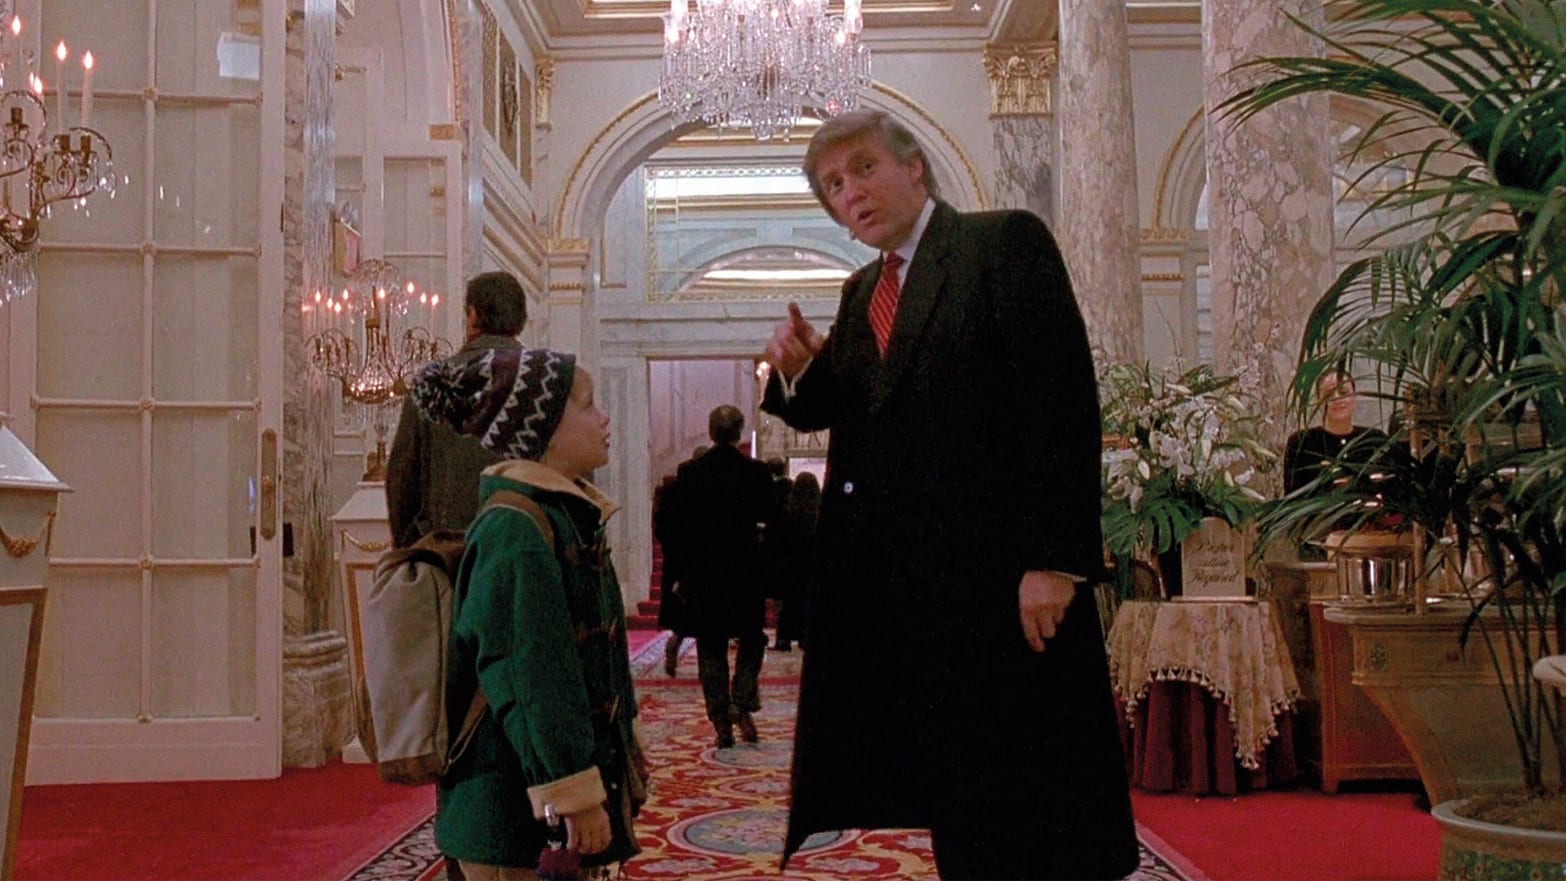 Donald Trump points with Macaulay Culkin in a still from Home Alone 2